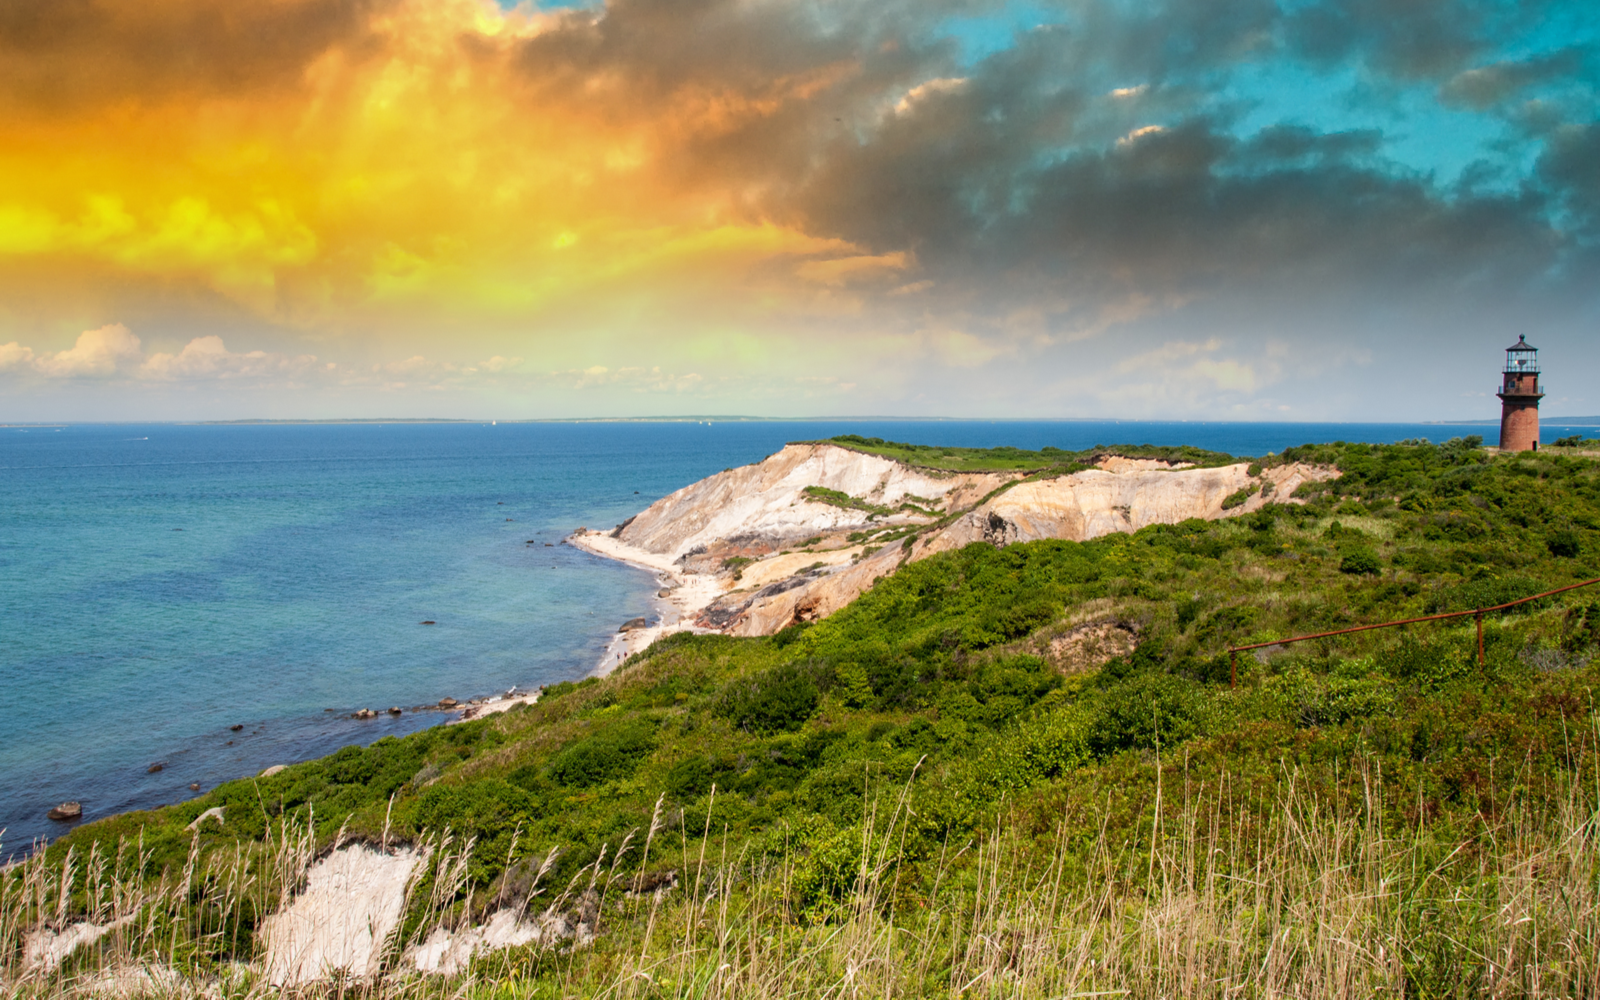 Coastal lighthouse in Martha's Vineyard as a featured image for a piece on the best beaches on the East Coast